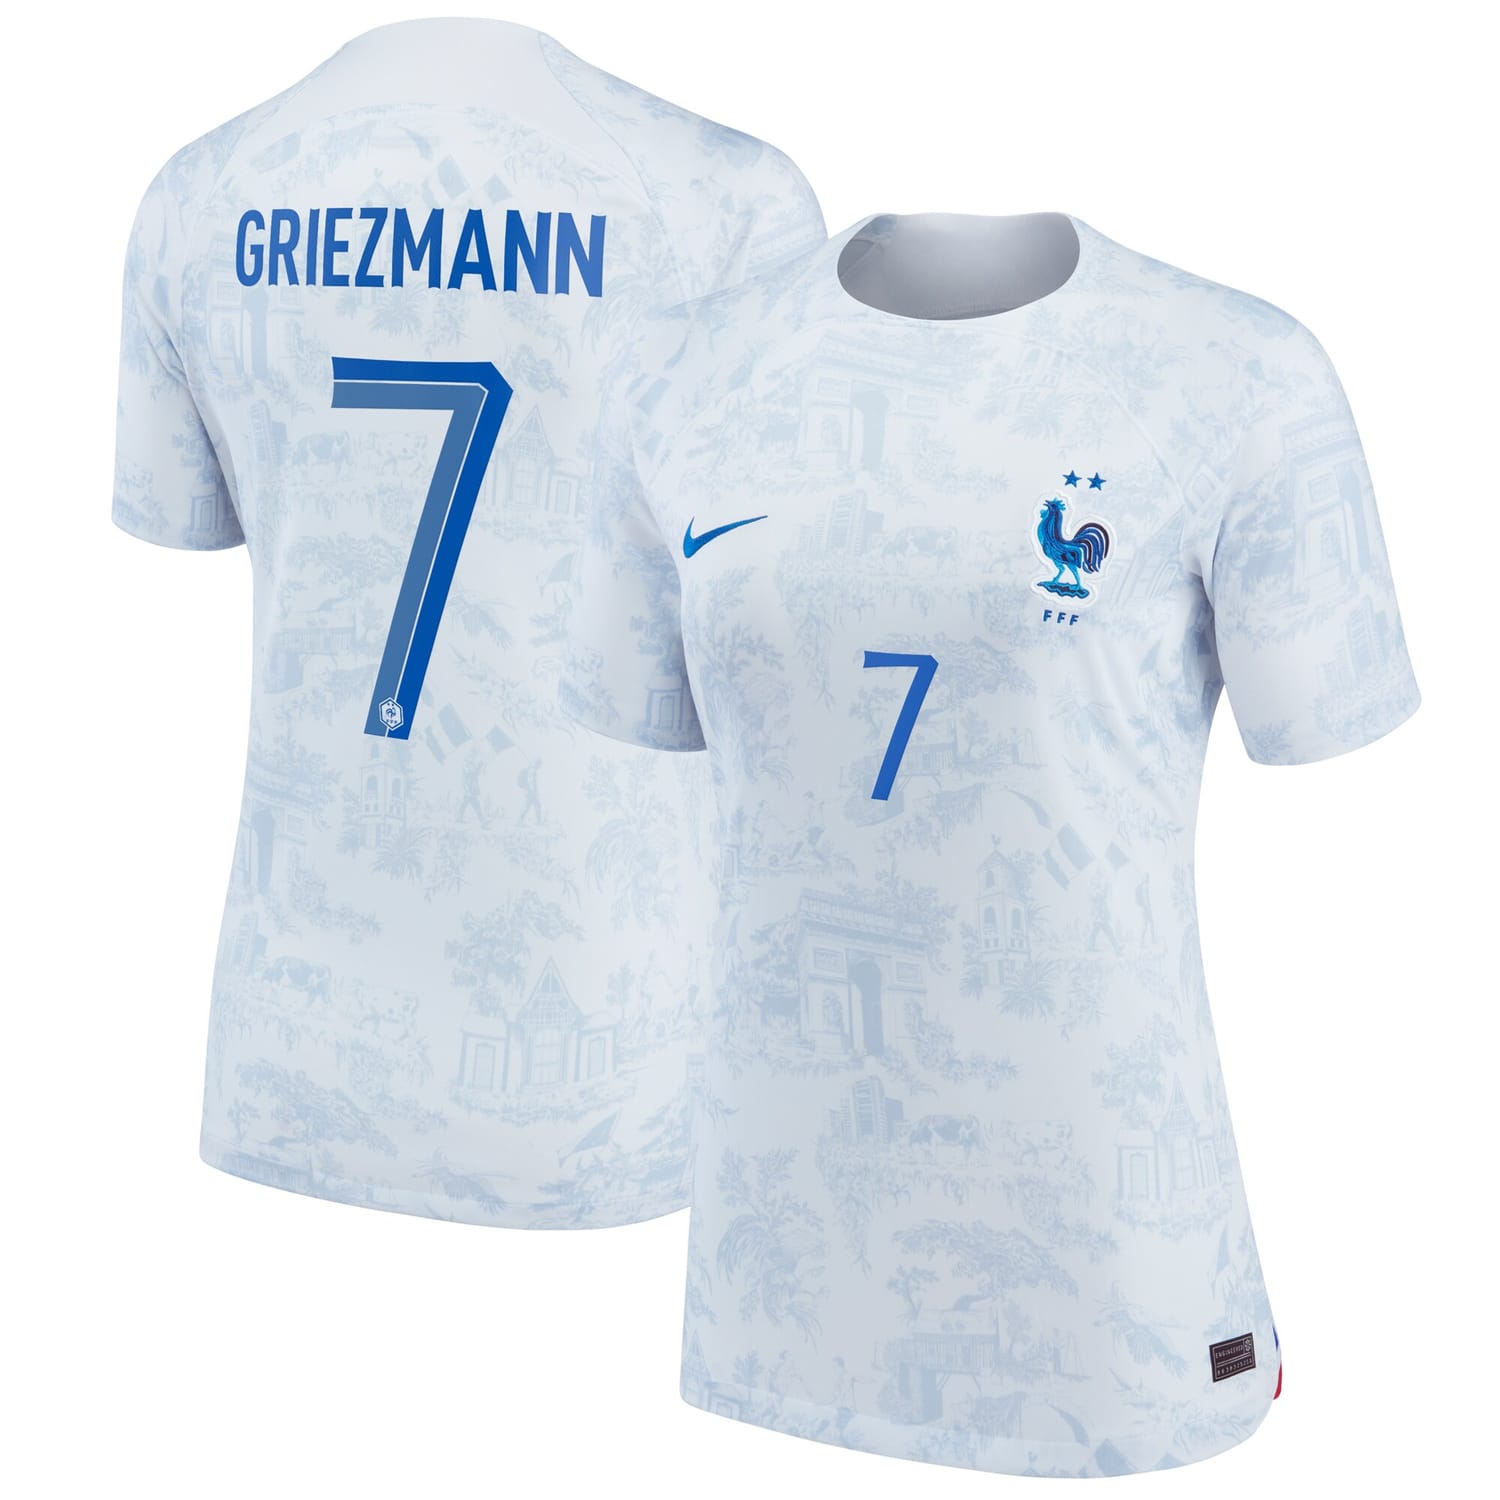 France National Team Away Jersey Shirt White 2022-23 player Antoine Griezmann printing for Women